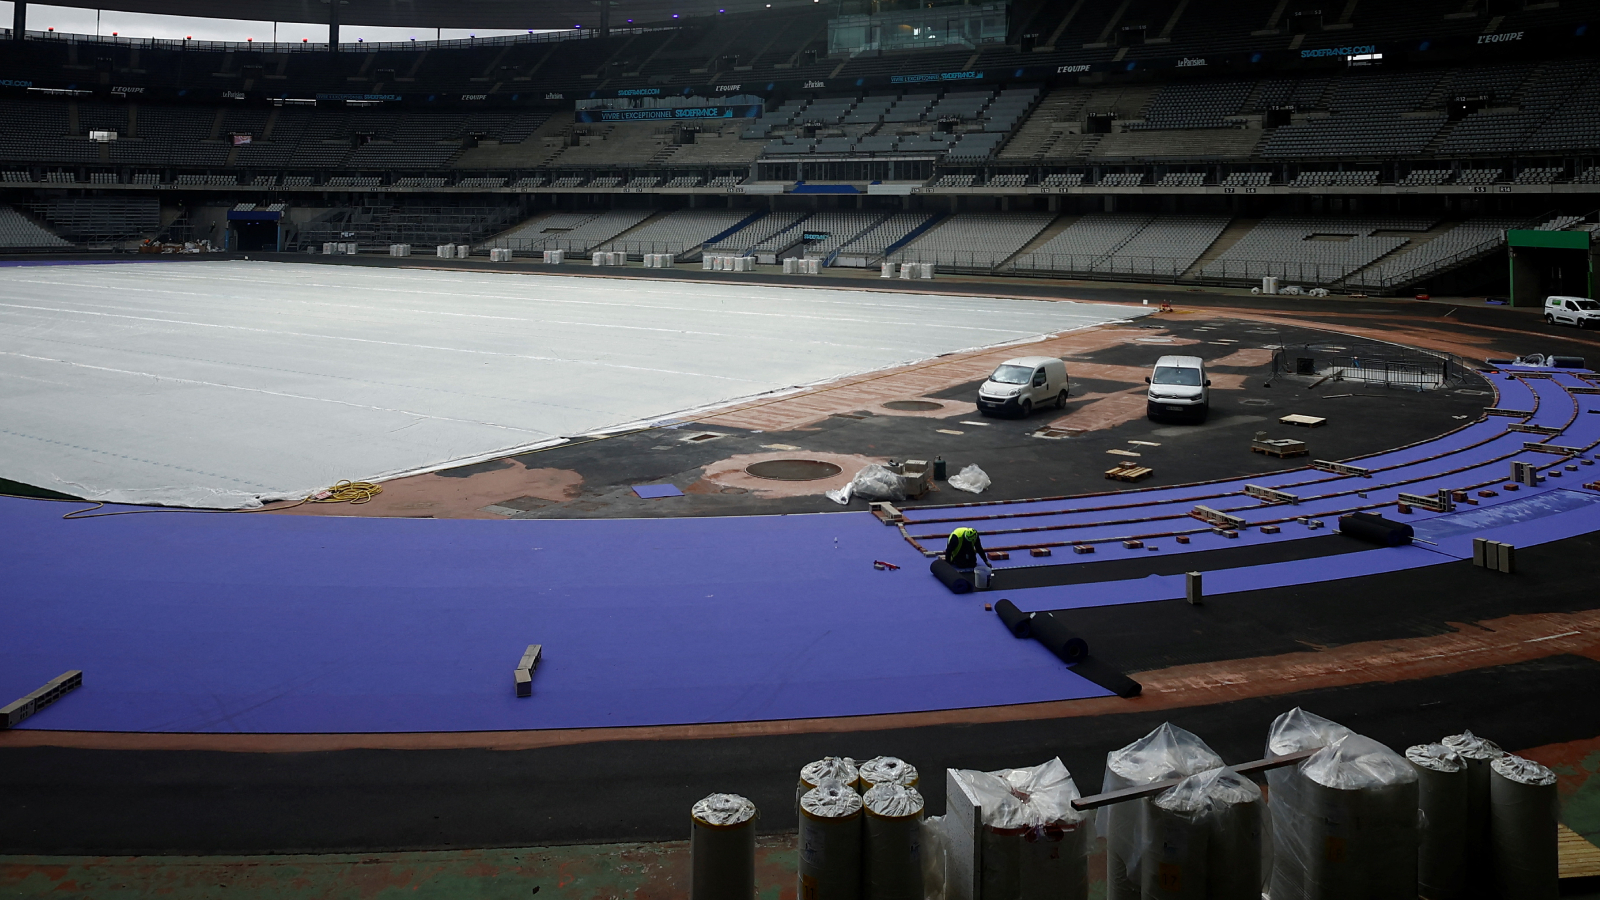 The Paris Olympics track will be of lavender colour instead of the usual red-orange. REUTERS